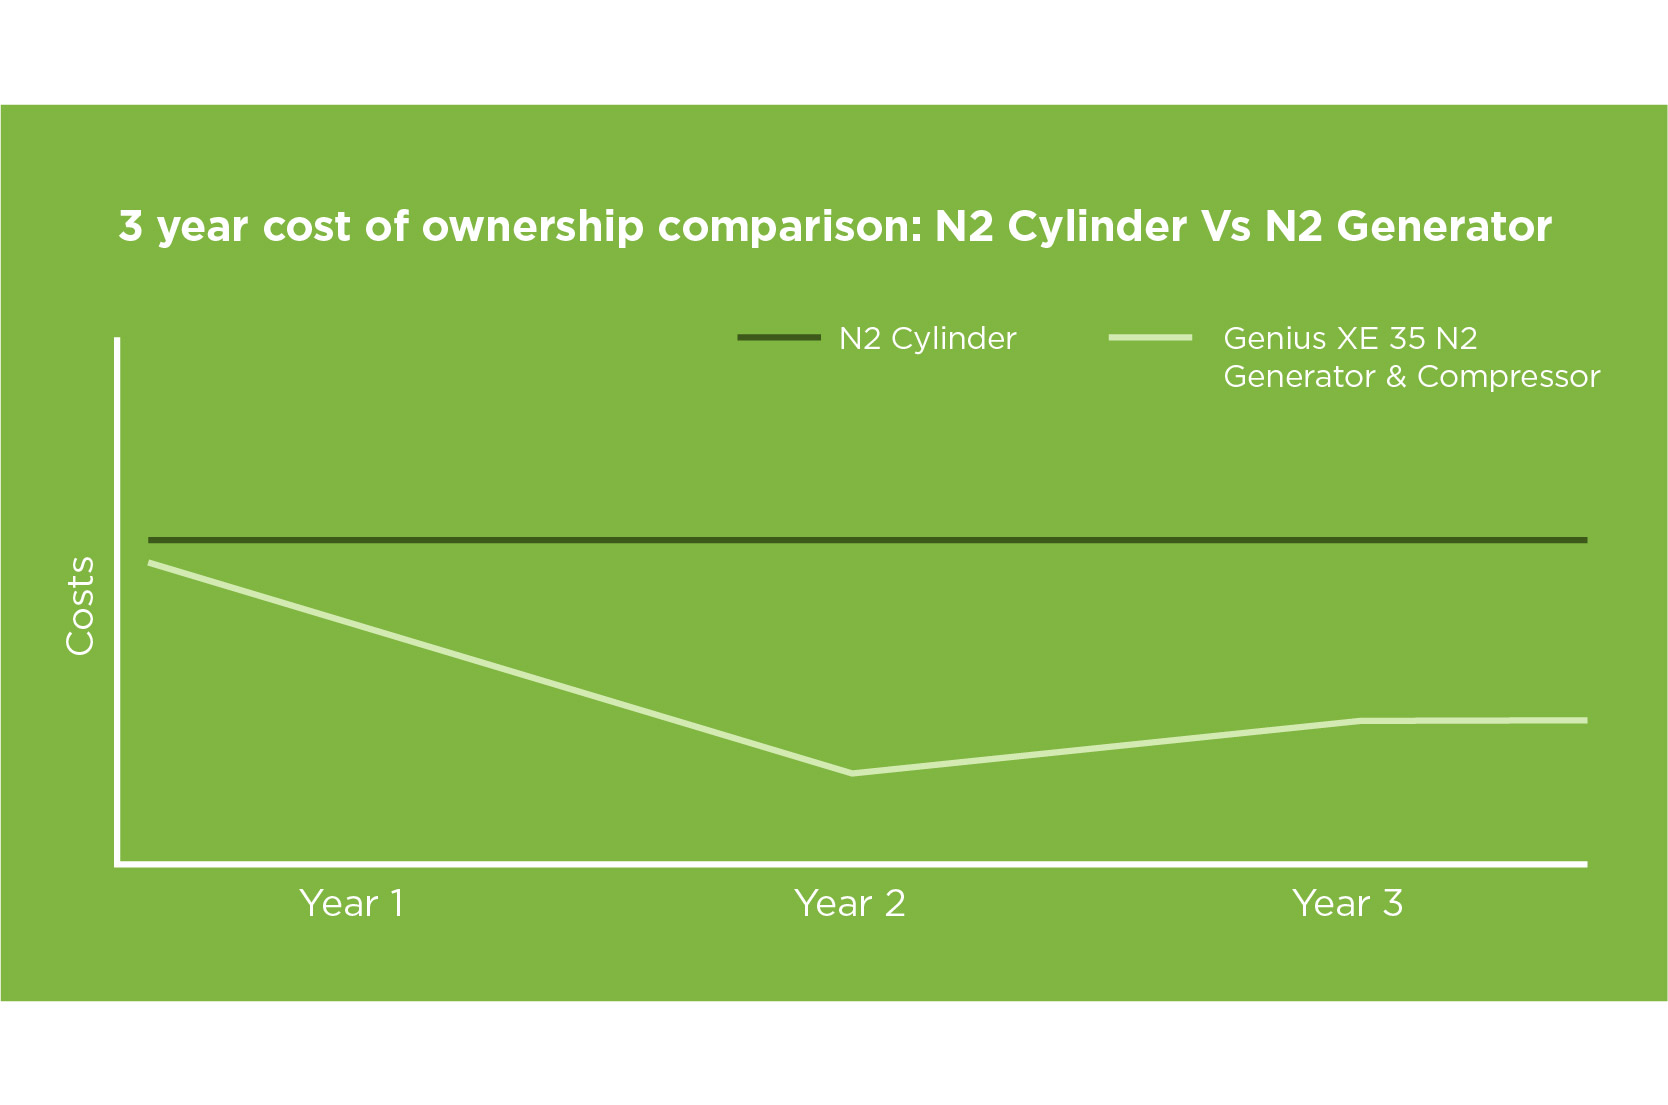 Graph showing the lower cost of ownership of a gas generator compared to gas cylinders